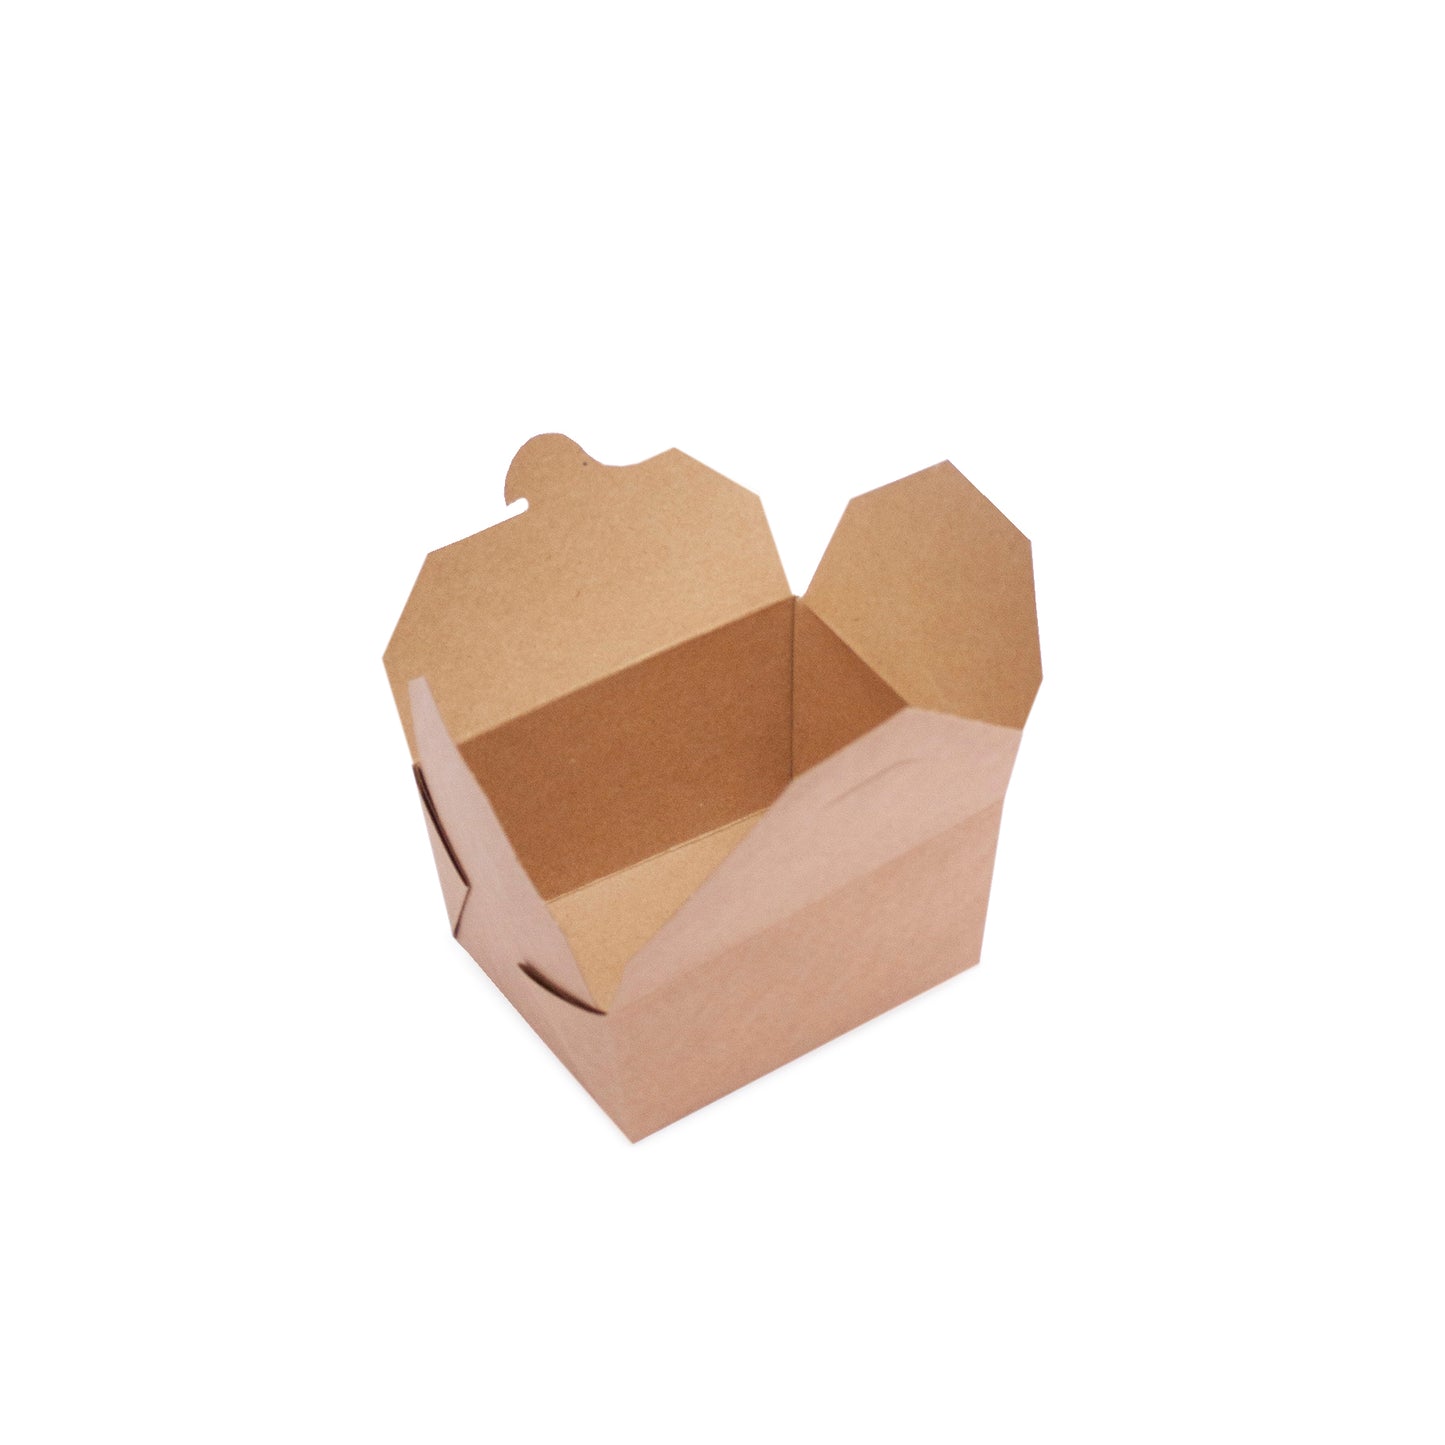 Food Container No.1 Take-away food-to-go carton 450 units, 800ml (11 x 9 x 6.5cm)